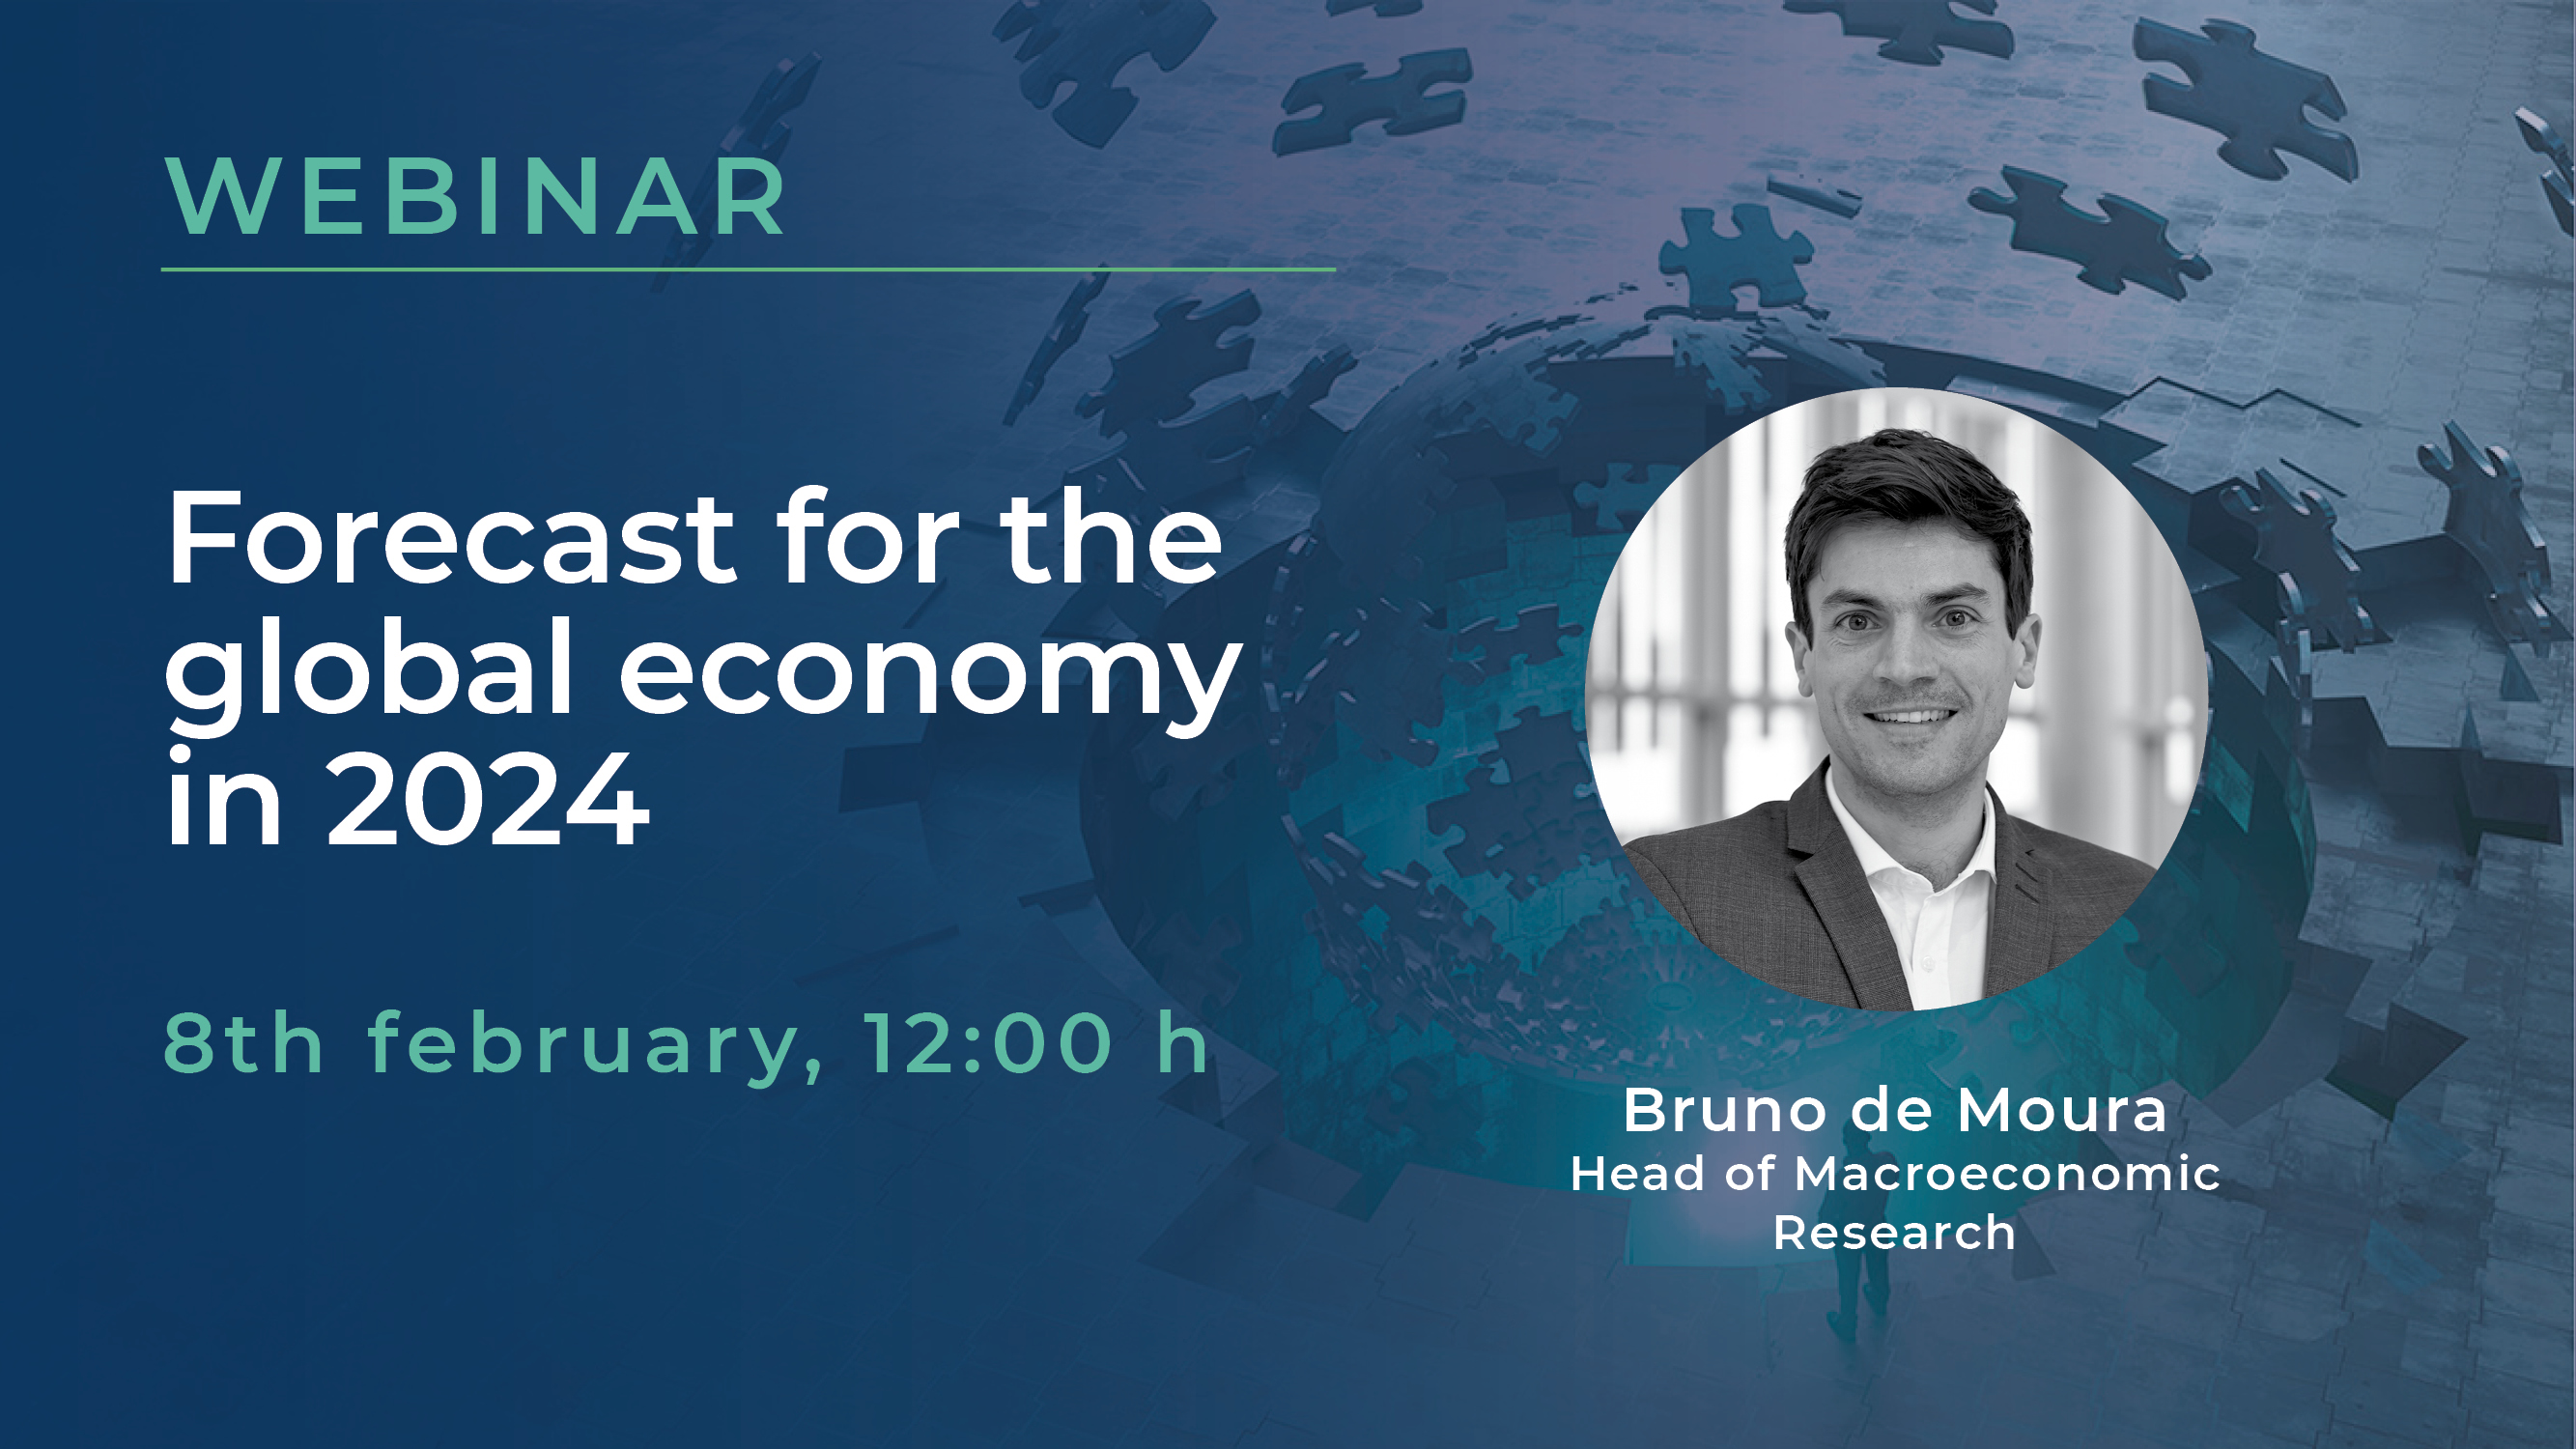 Webinar: Forecast for the global economy in 2024, on February 8 at 12 pm with Bruno de Moura, Head of Macroeconomic Research